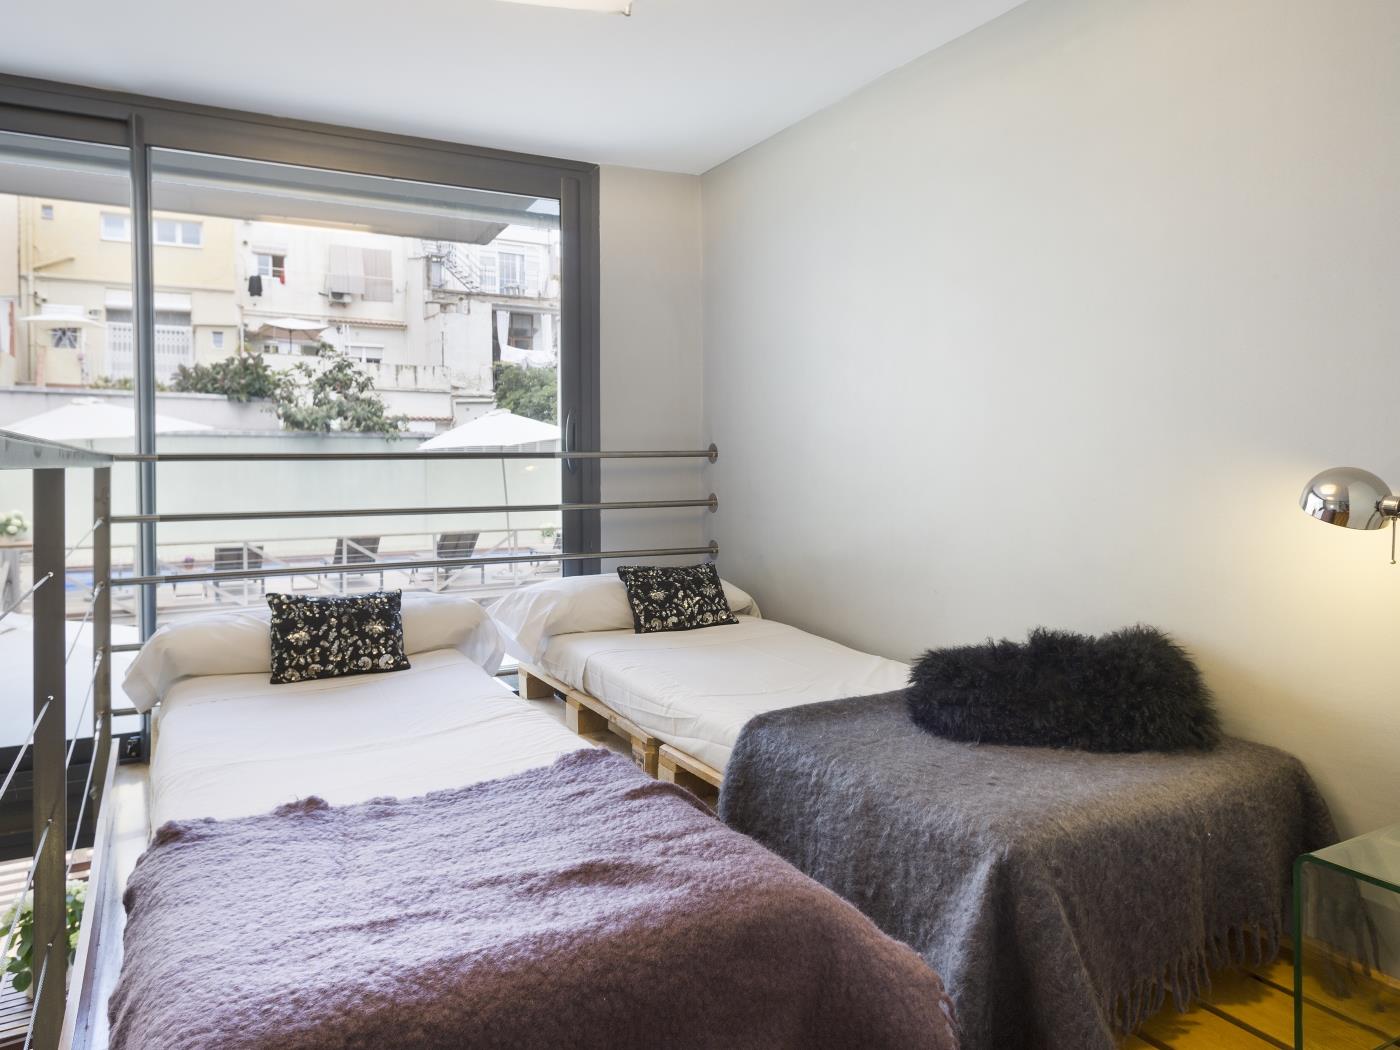 Terrace and pool apartment near the Barcelona centre - My Space Barcelona Aпартаменты